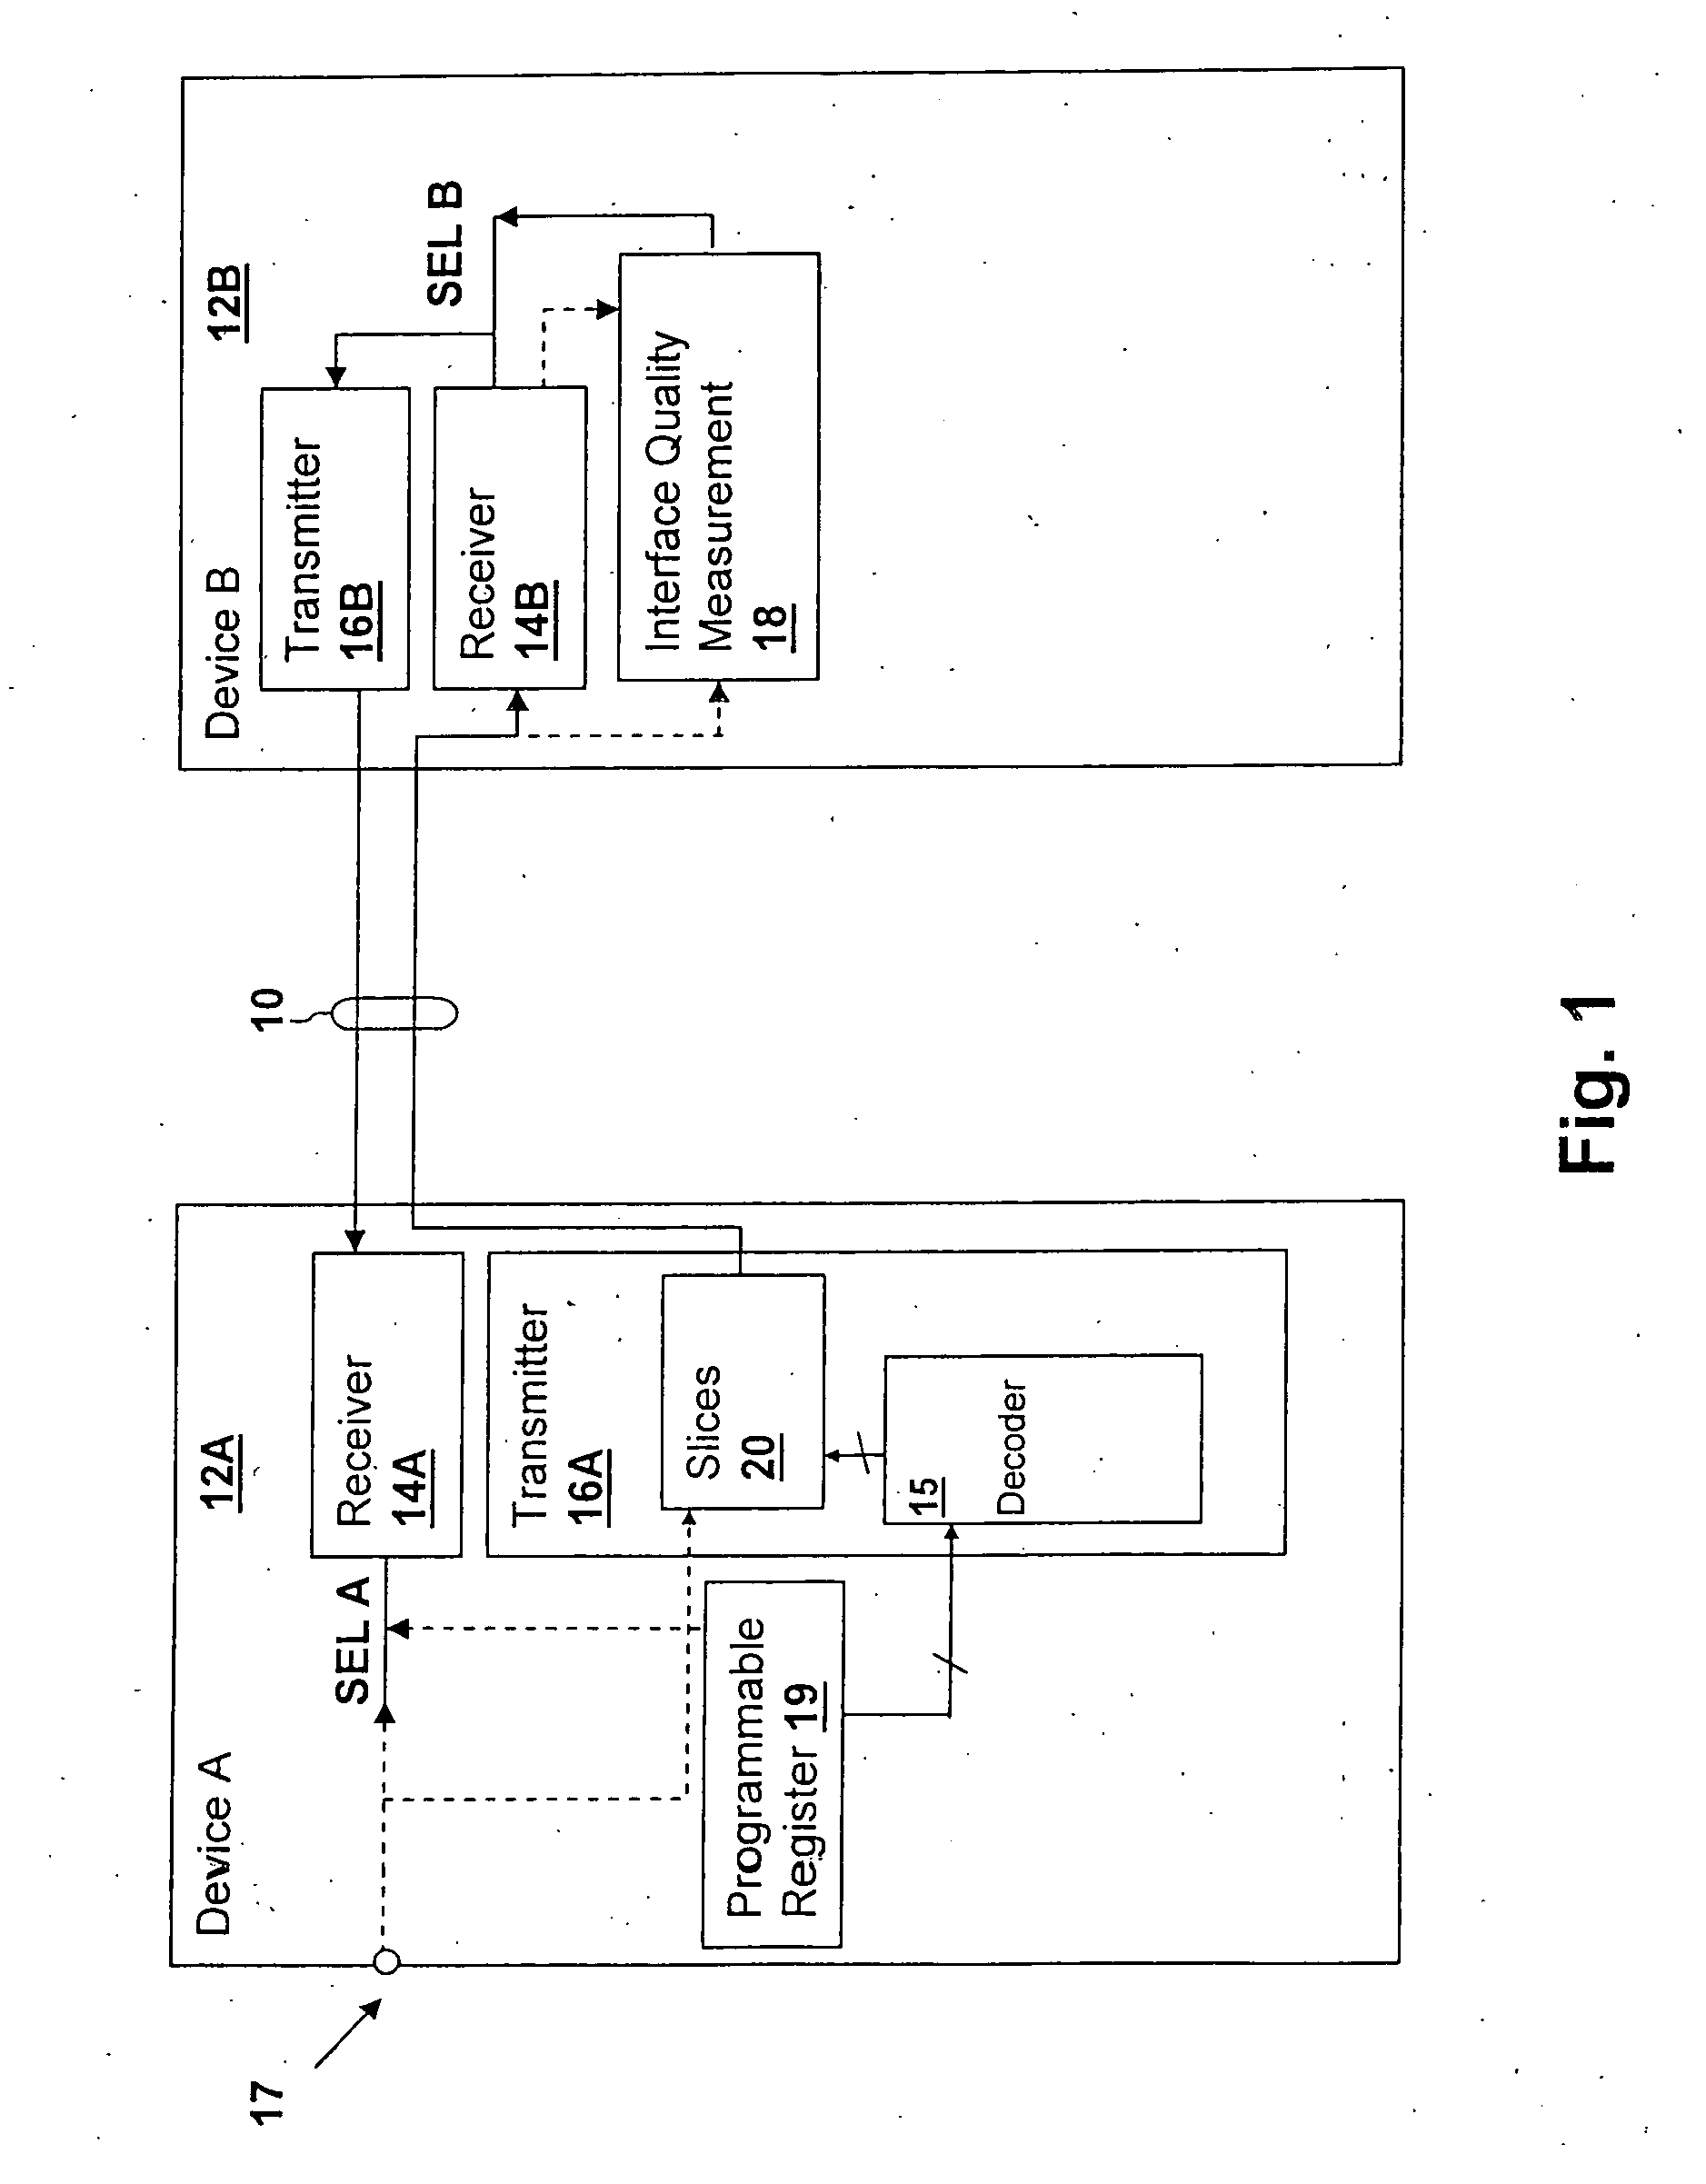 Digital transmission circuit and method providing selectable power consumption via multiple weighted driver slices